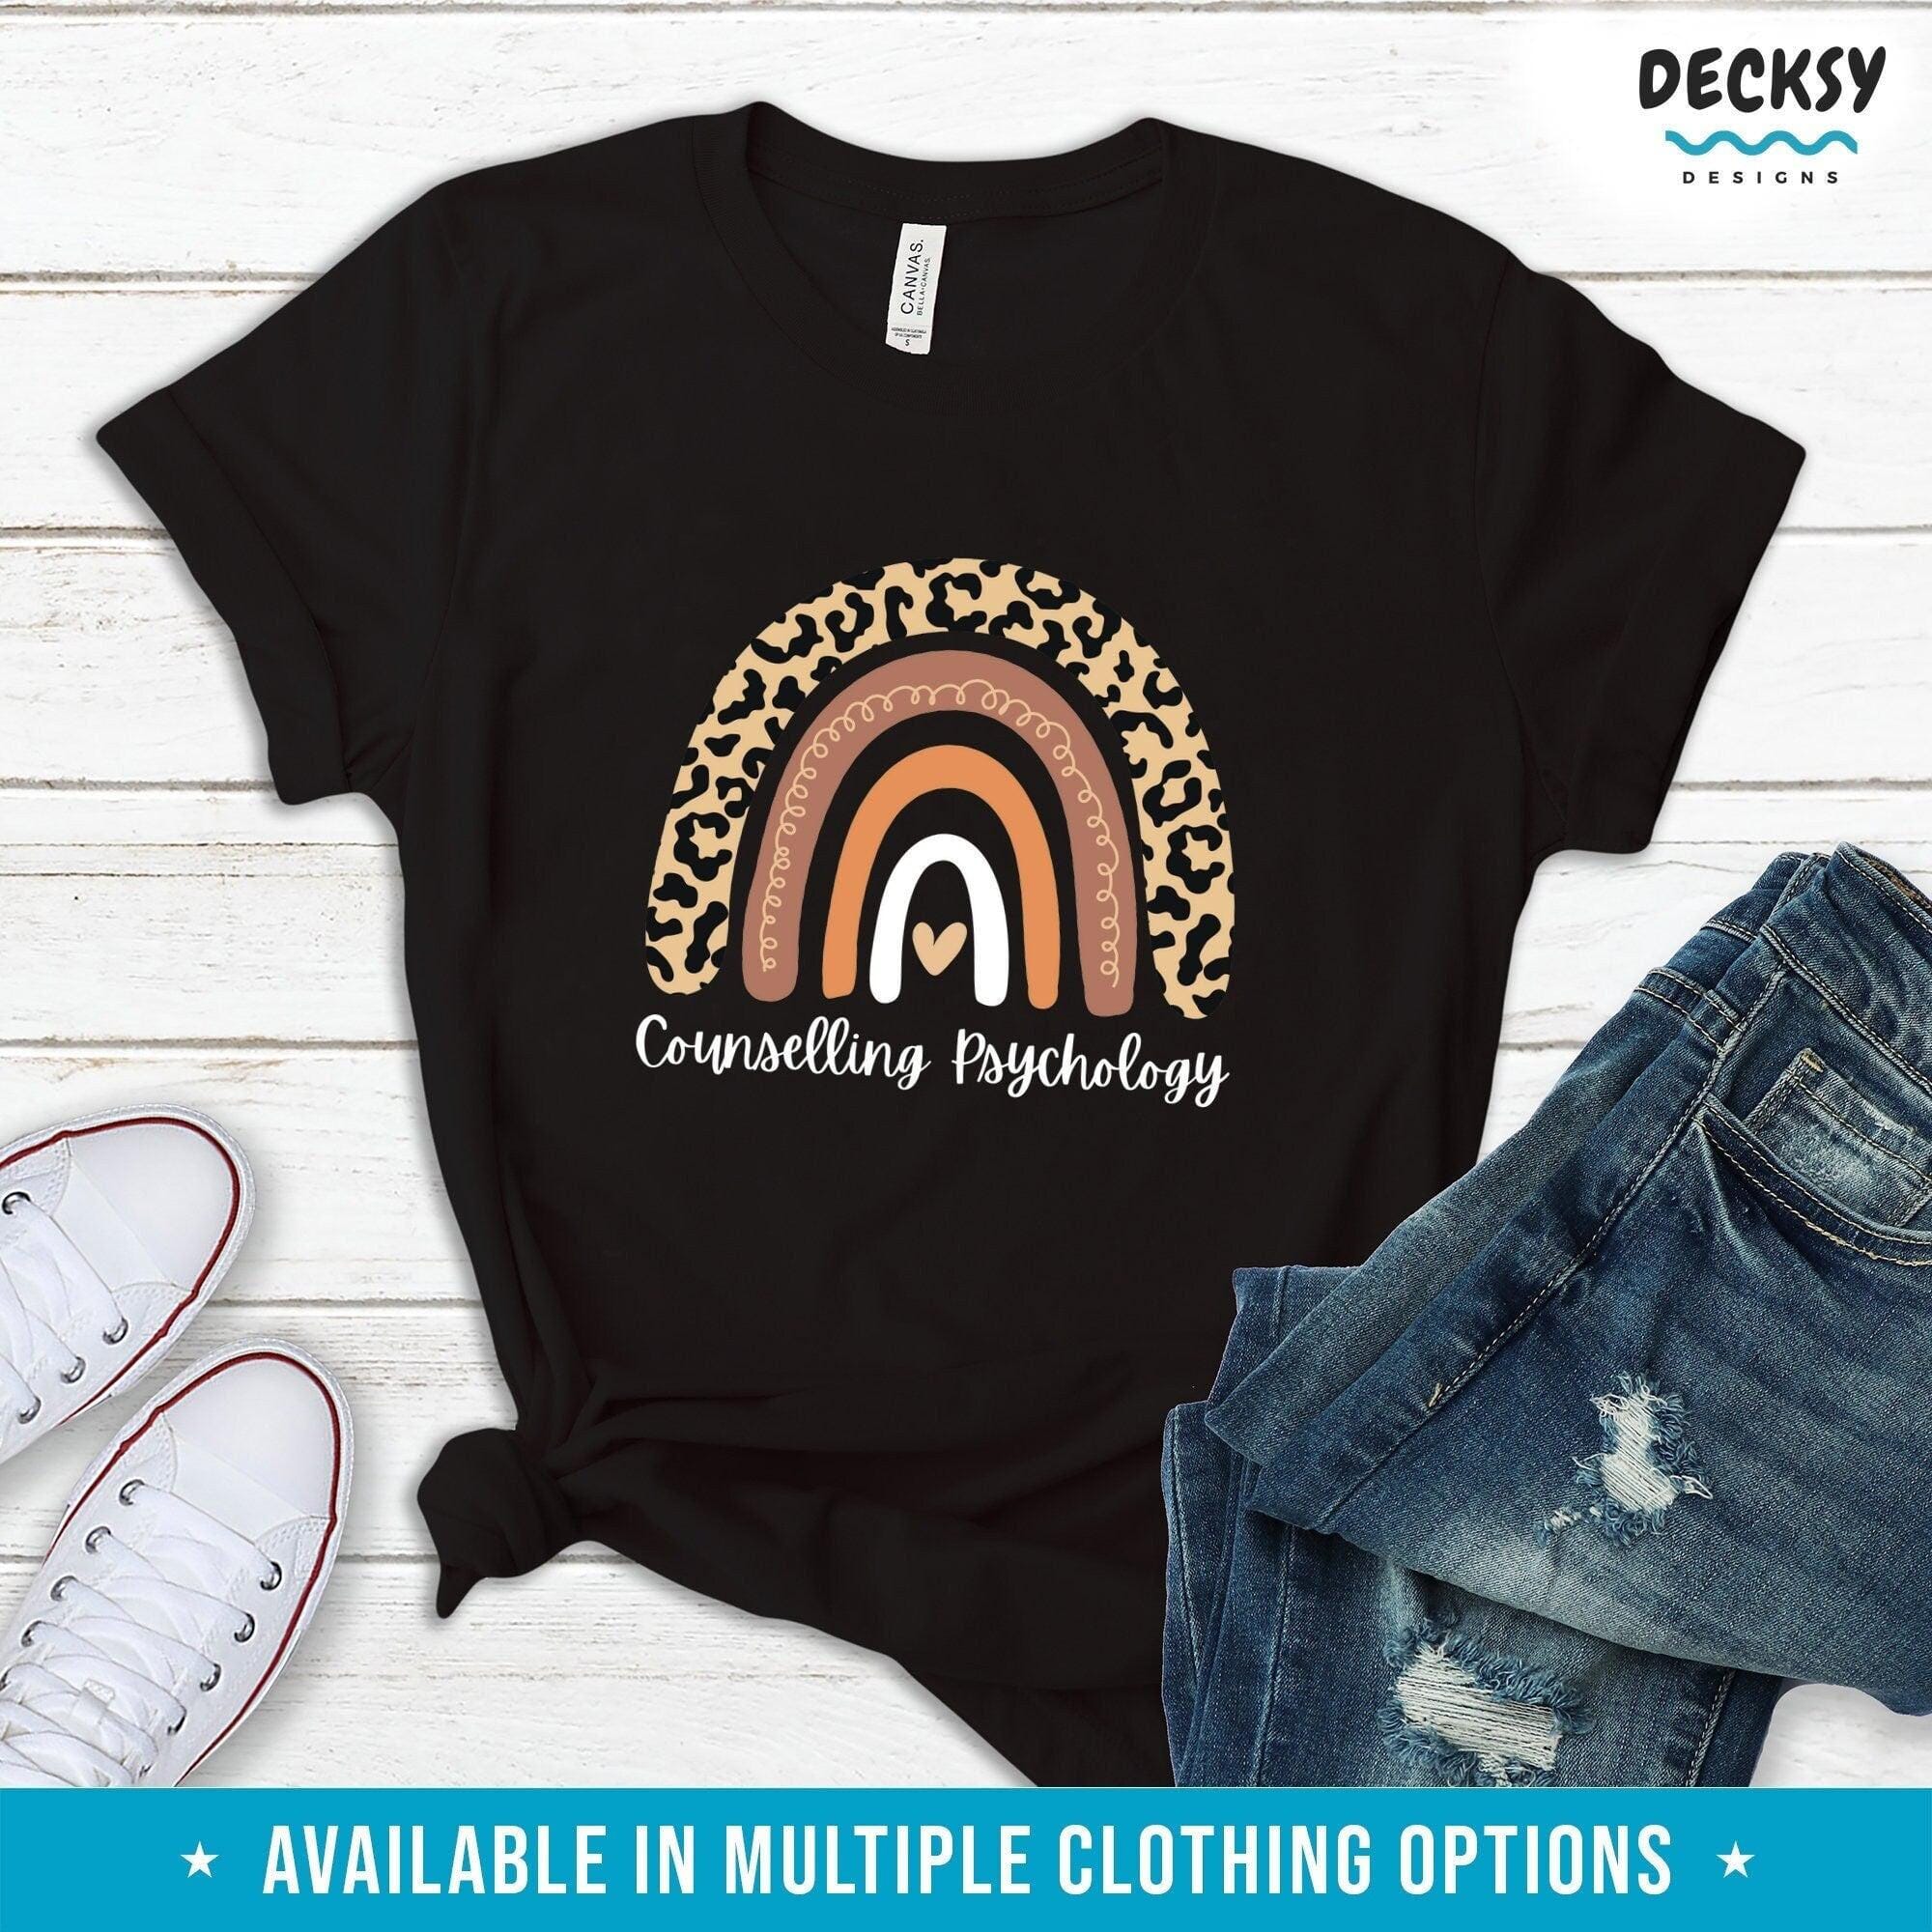 Counselling Psychology Shirt, Mental Health Worker Gift-Clothing:Gender-Neutral Adult Clothing:Tops & Tees:T-shirts:Graphic Tees-DecksyDesigns